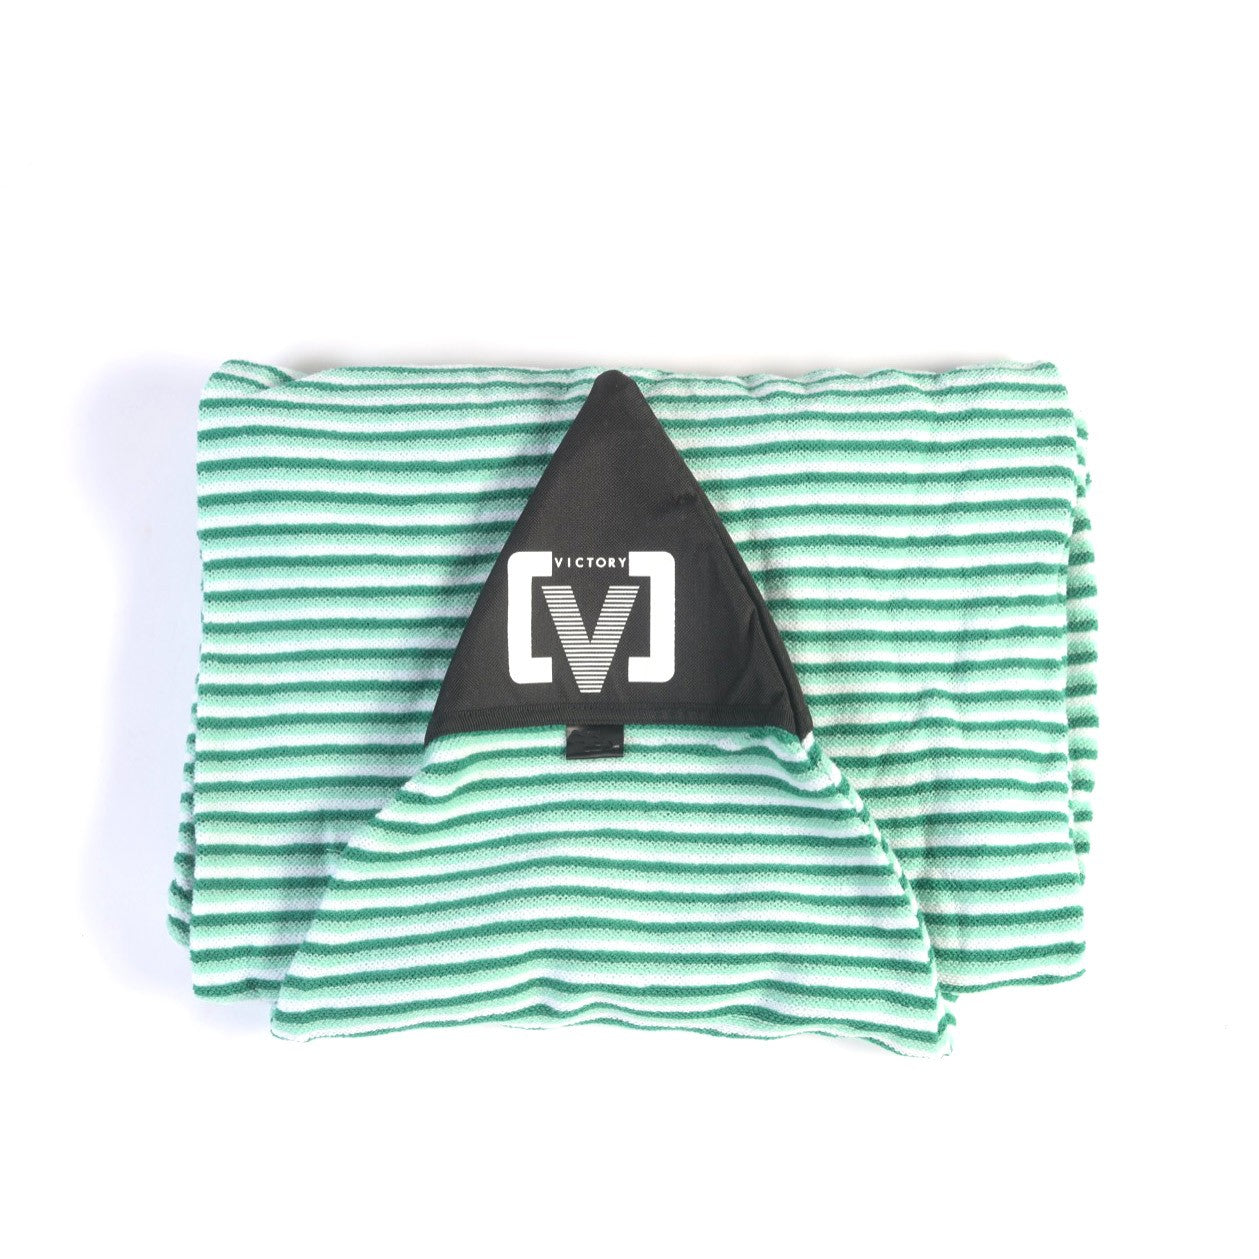 VICTORY - Surf sock cover - Shortboard - 5'10 - Green / White